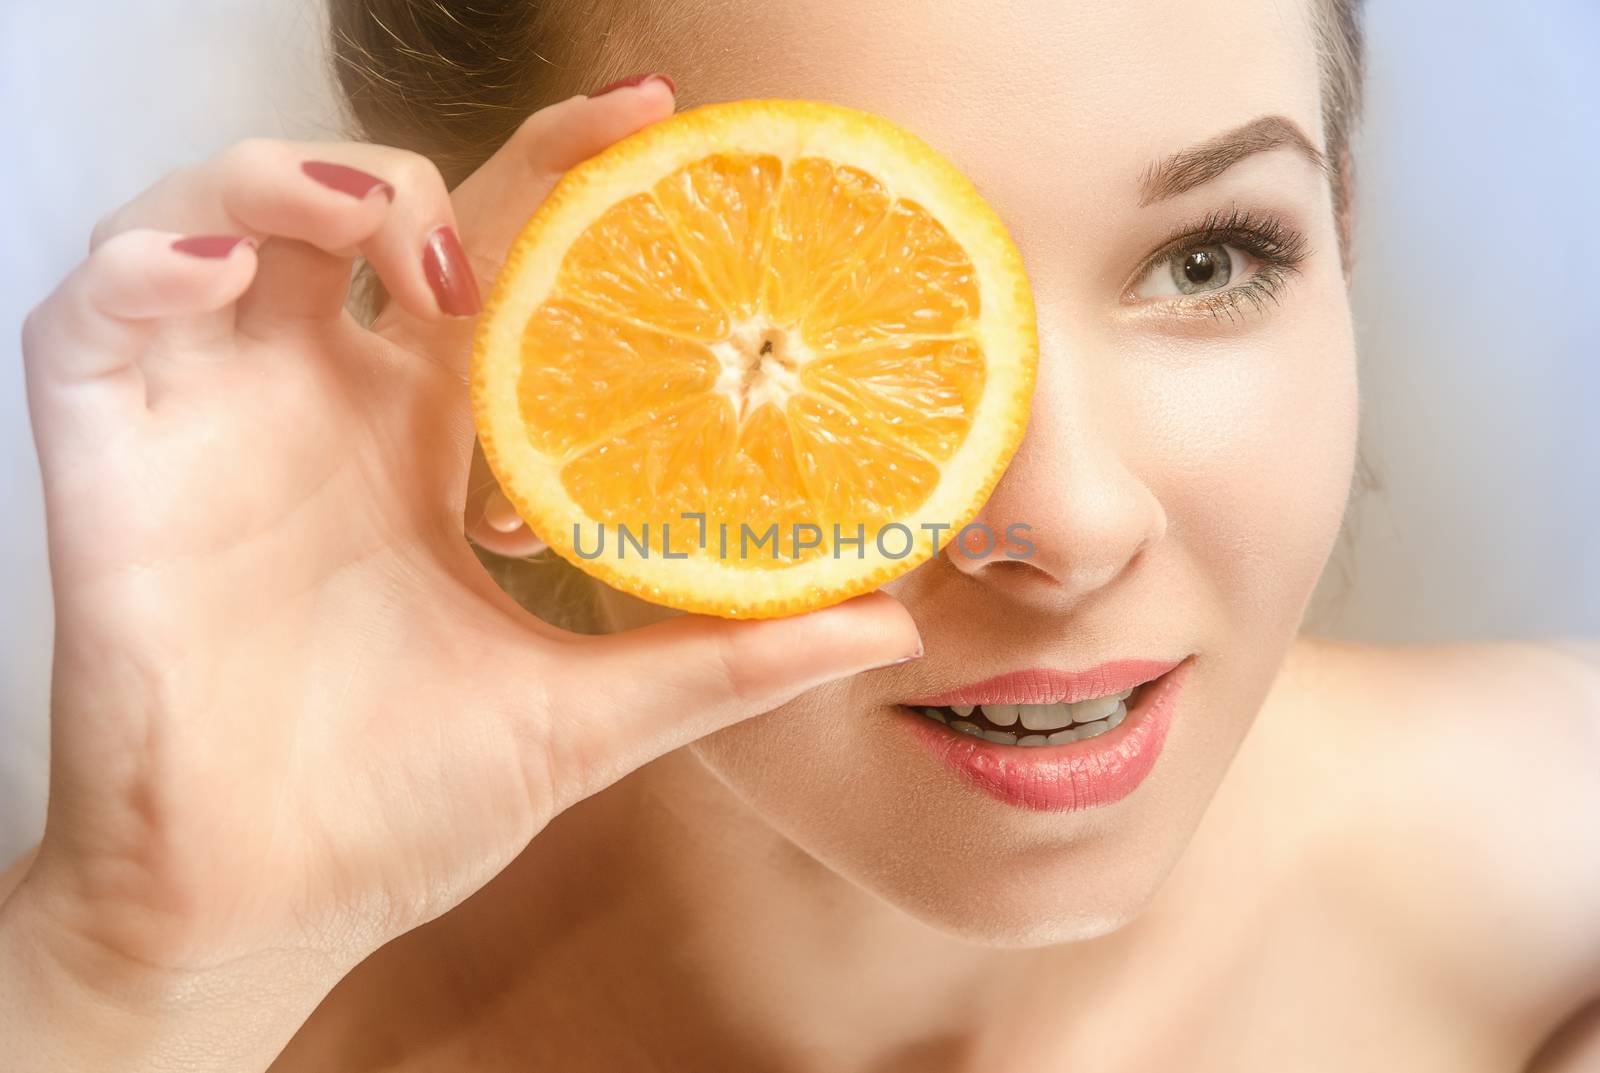 Young beautiful woman with perfect skin holding a slice of orange in front of her eyes and smiles looking ahead. Half-turn face. Gray background